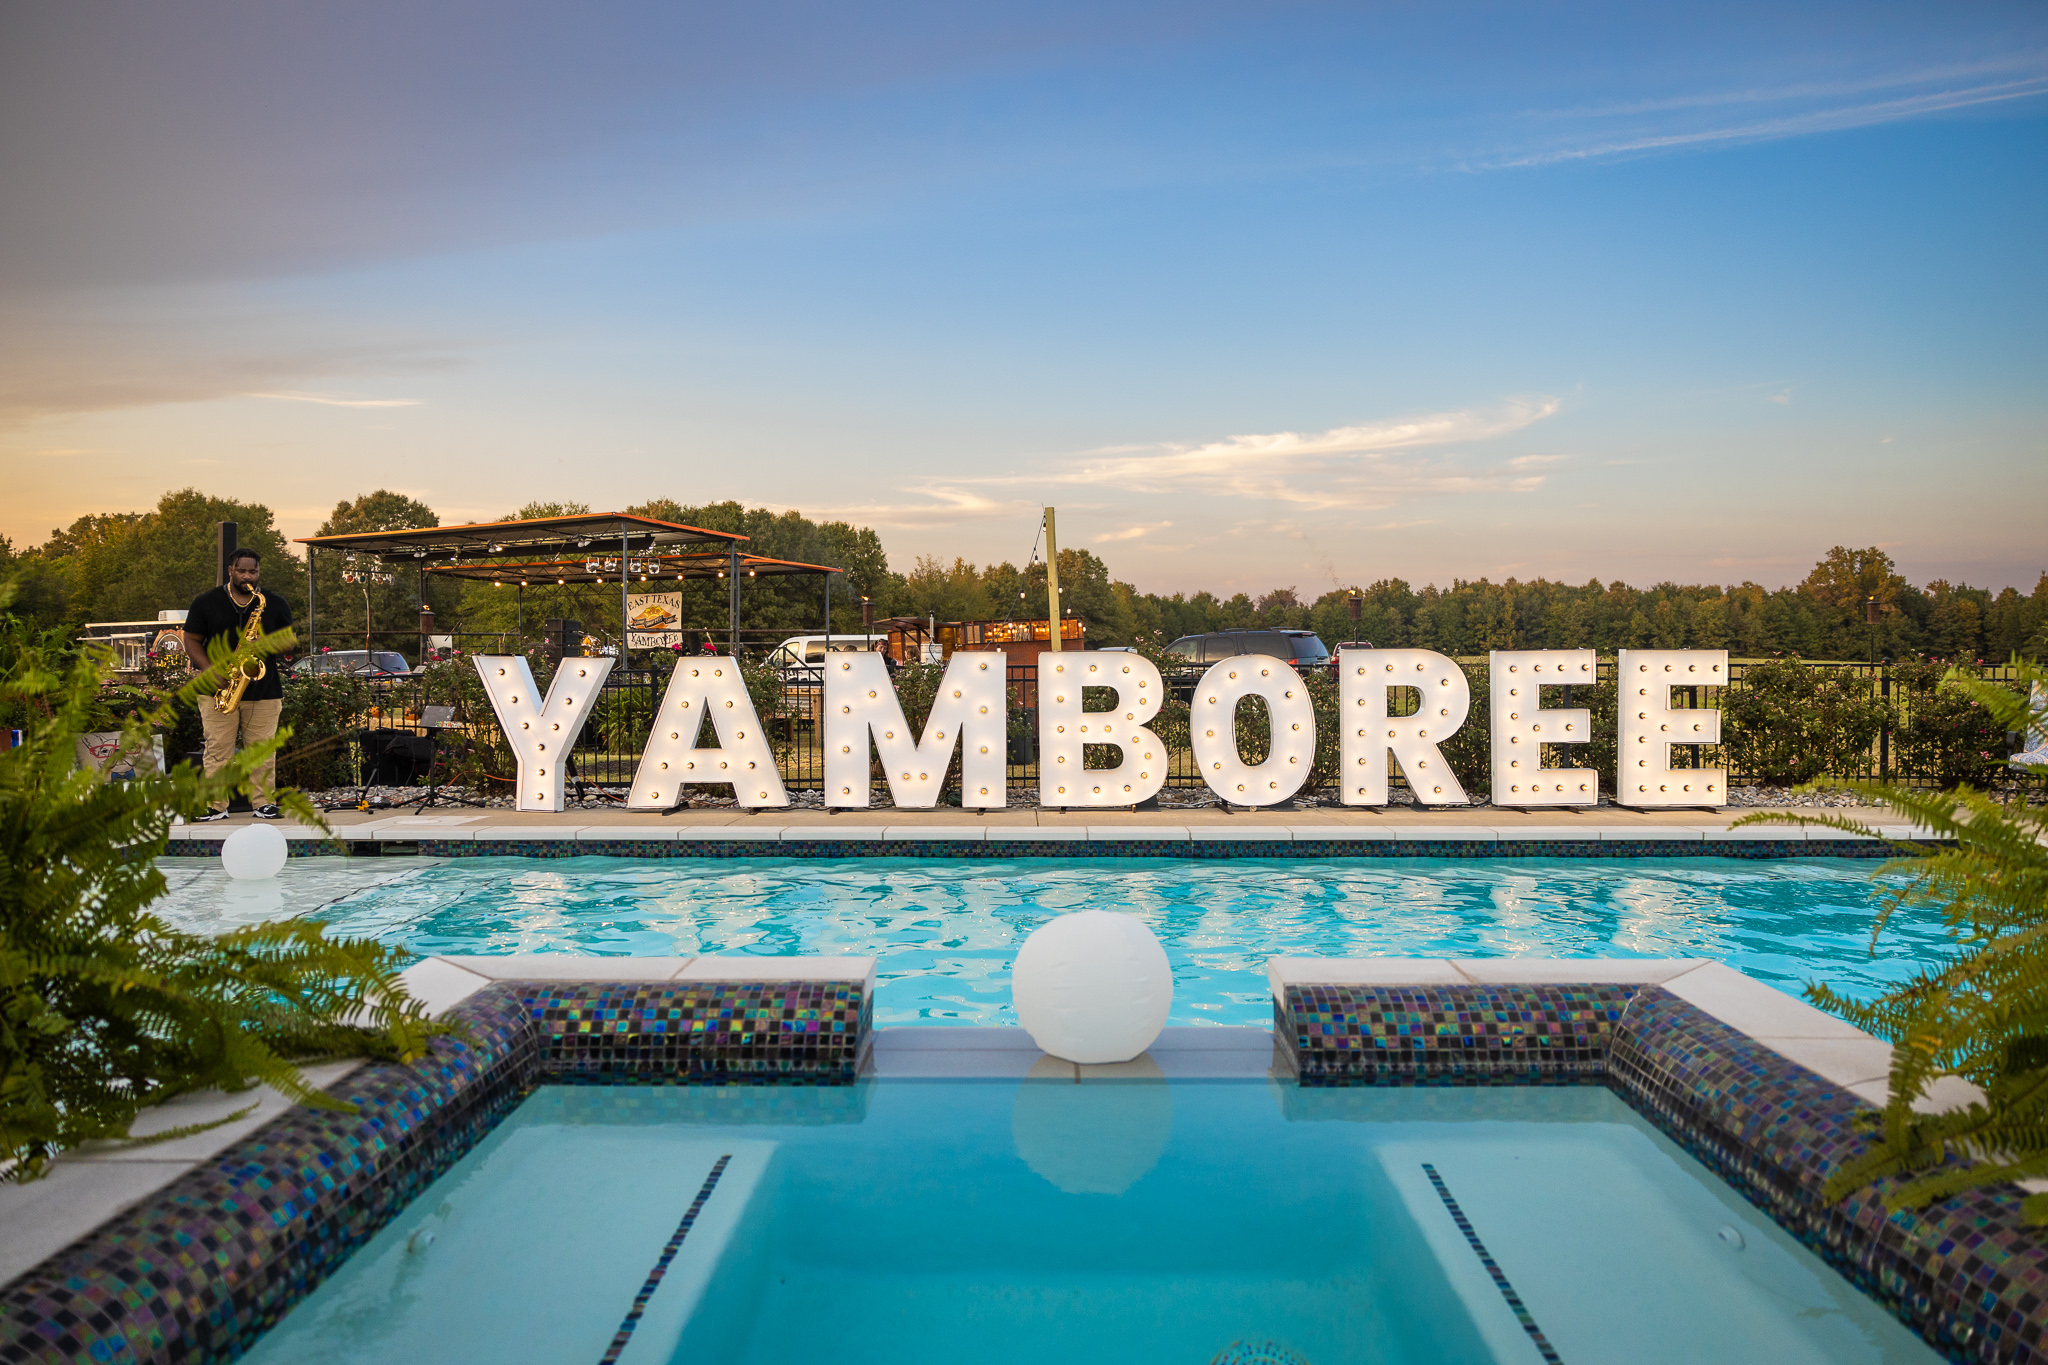 A pool with a sign that says yamboree.